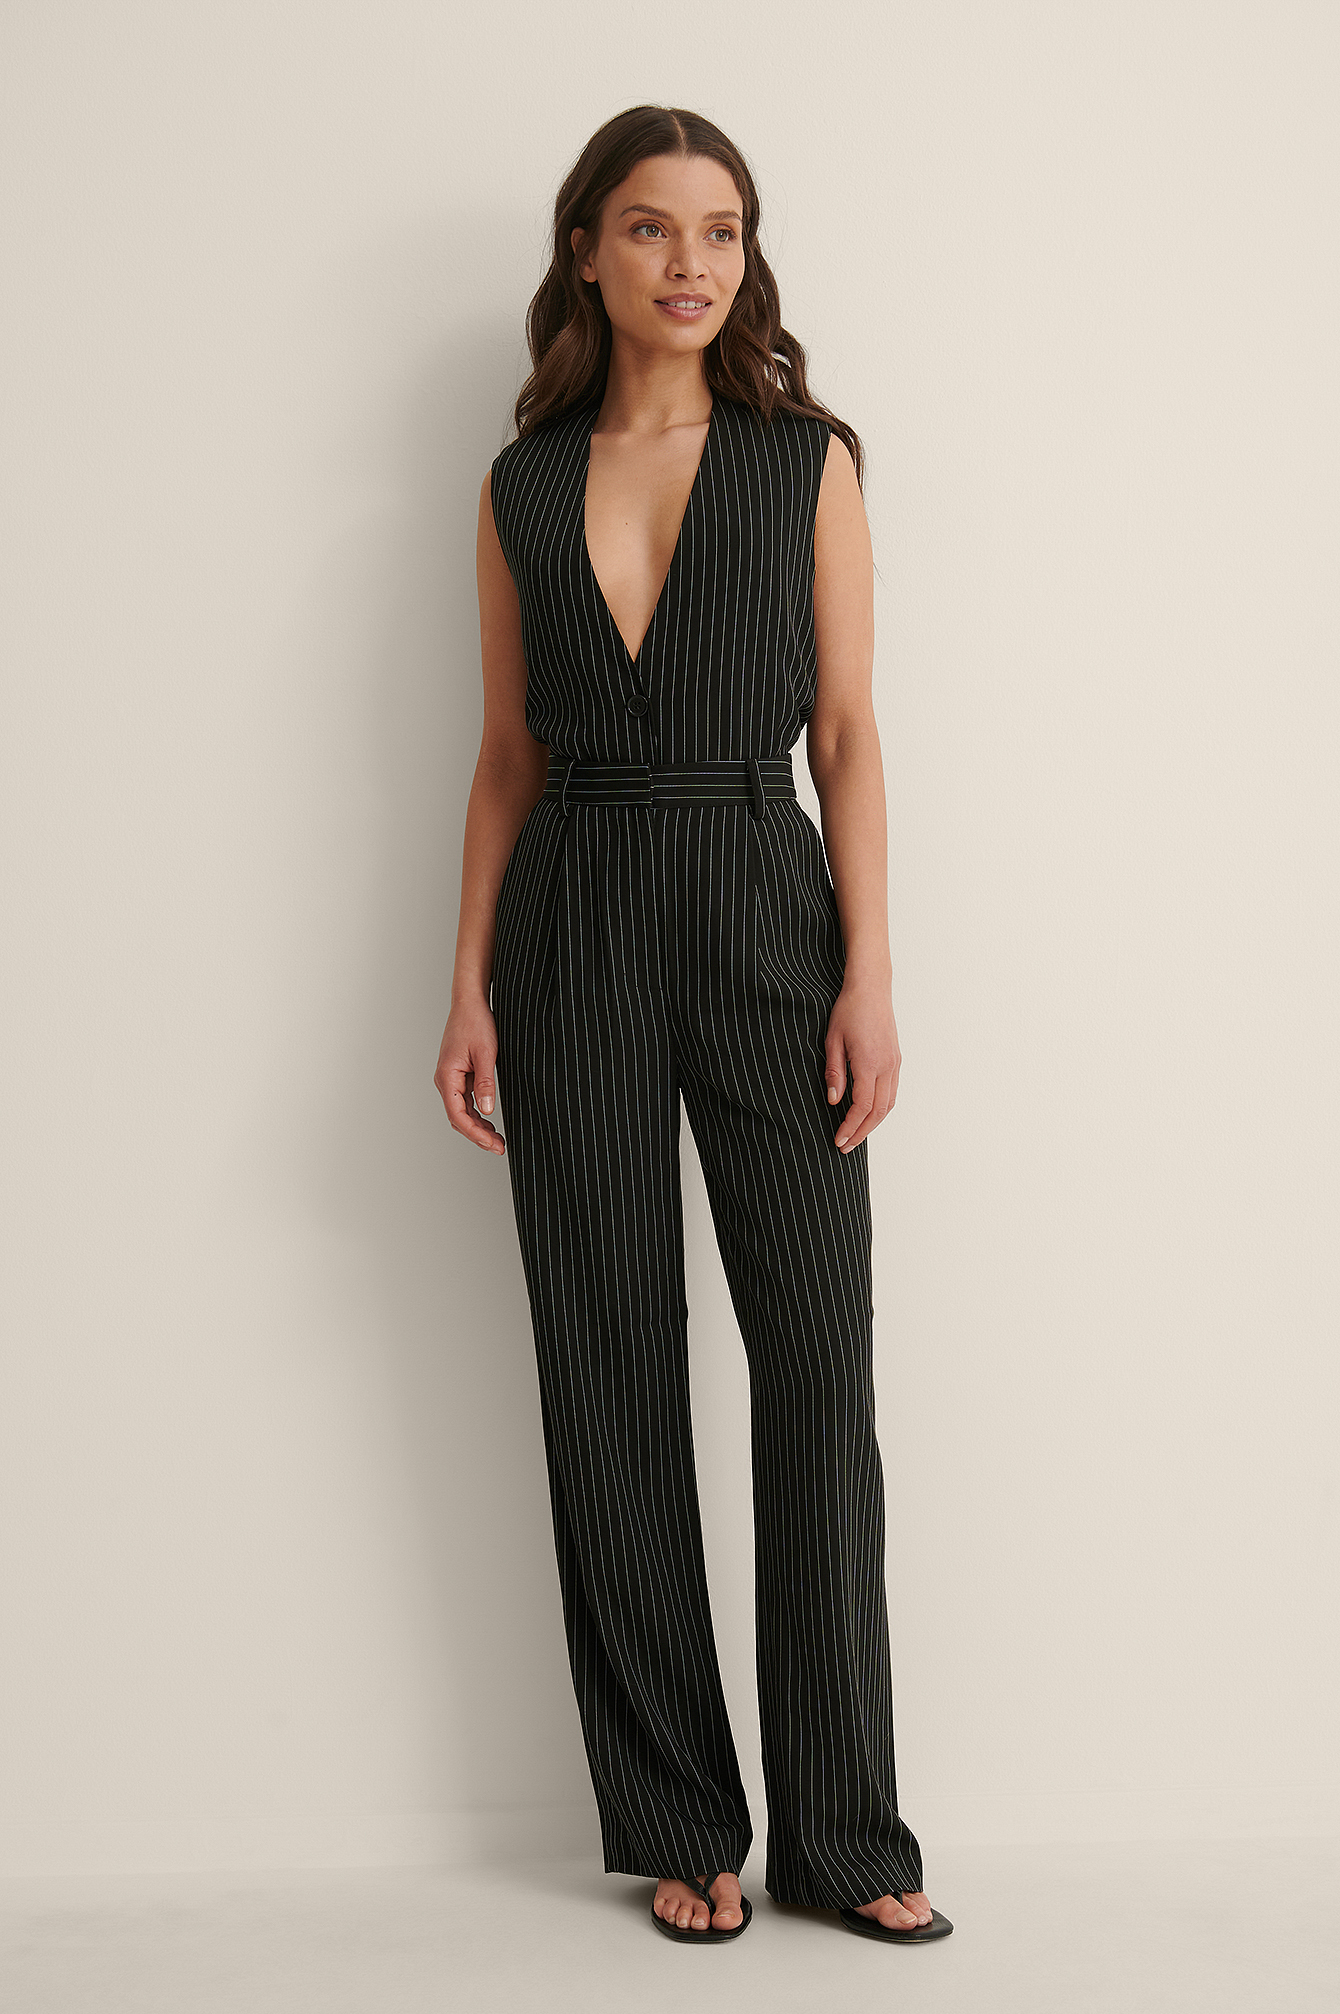 Striped Straight Suit Pants Outfit.